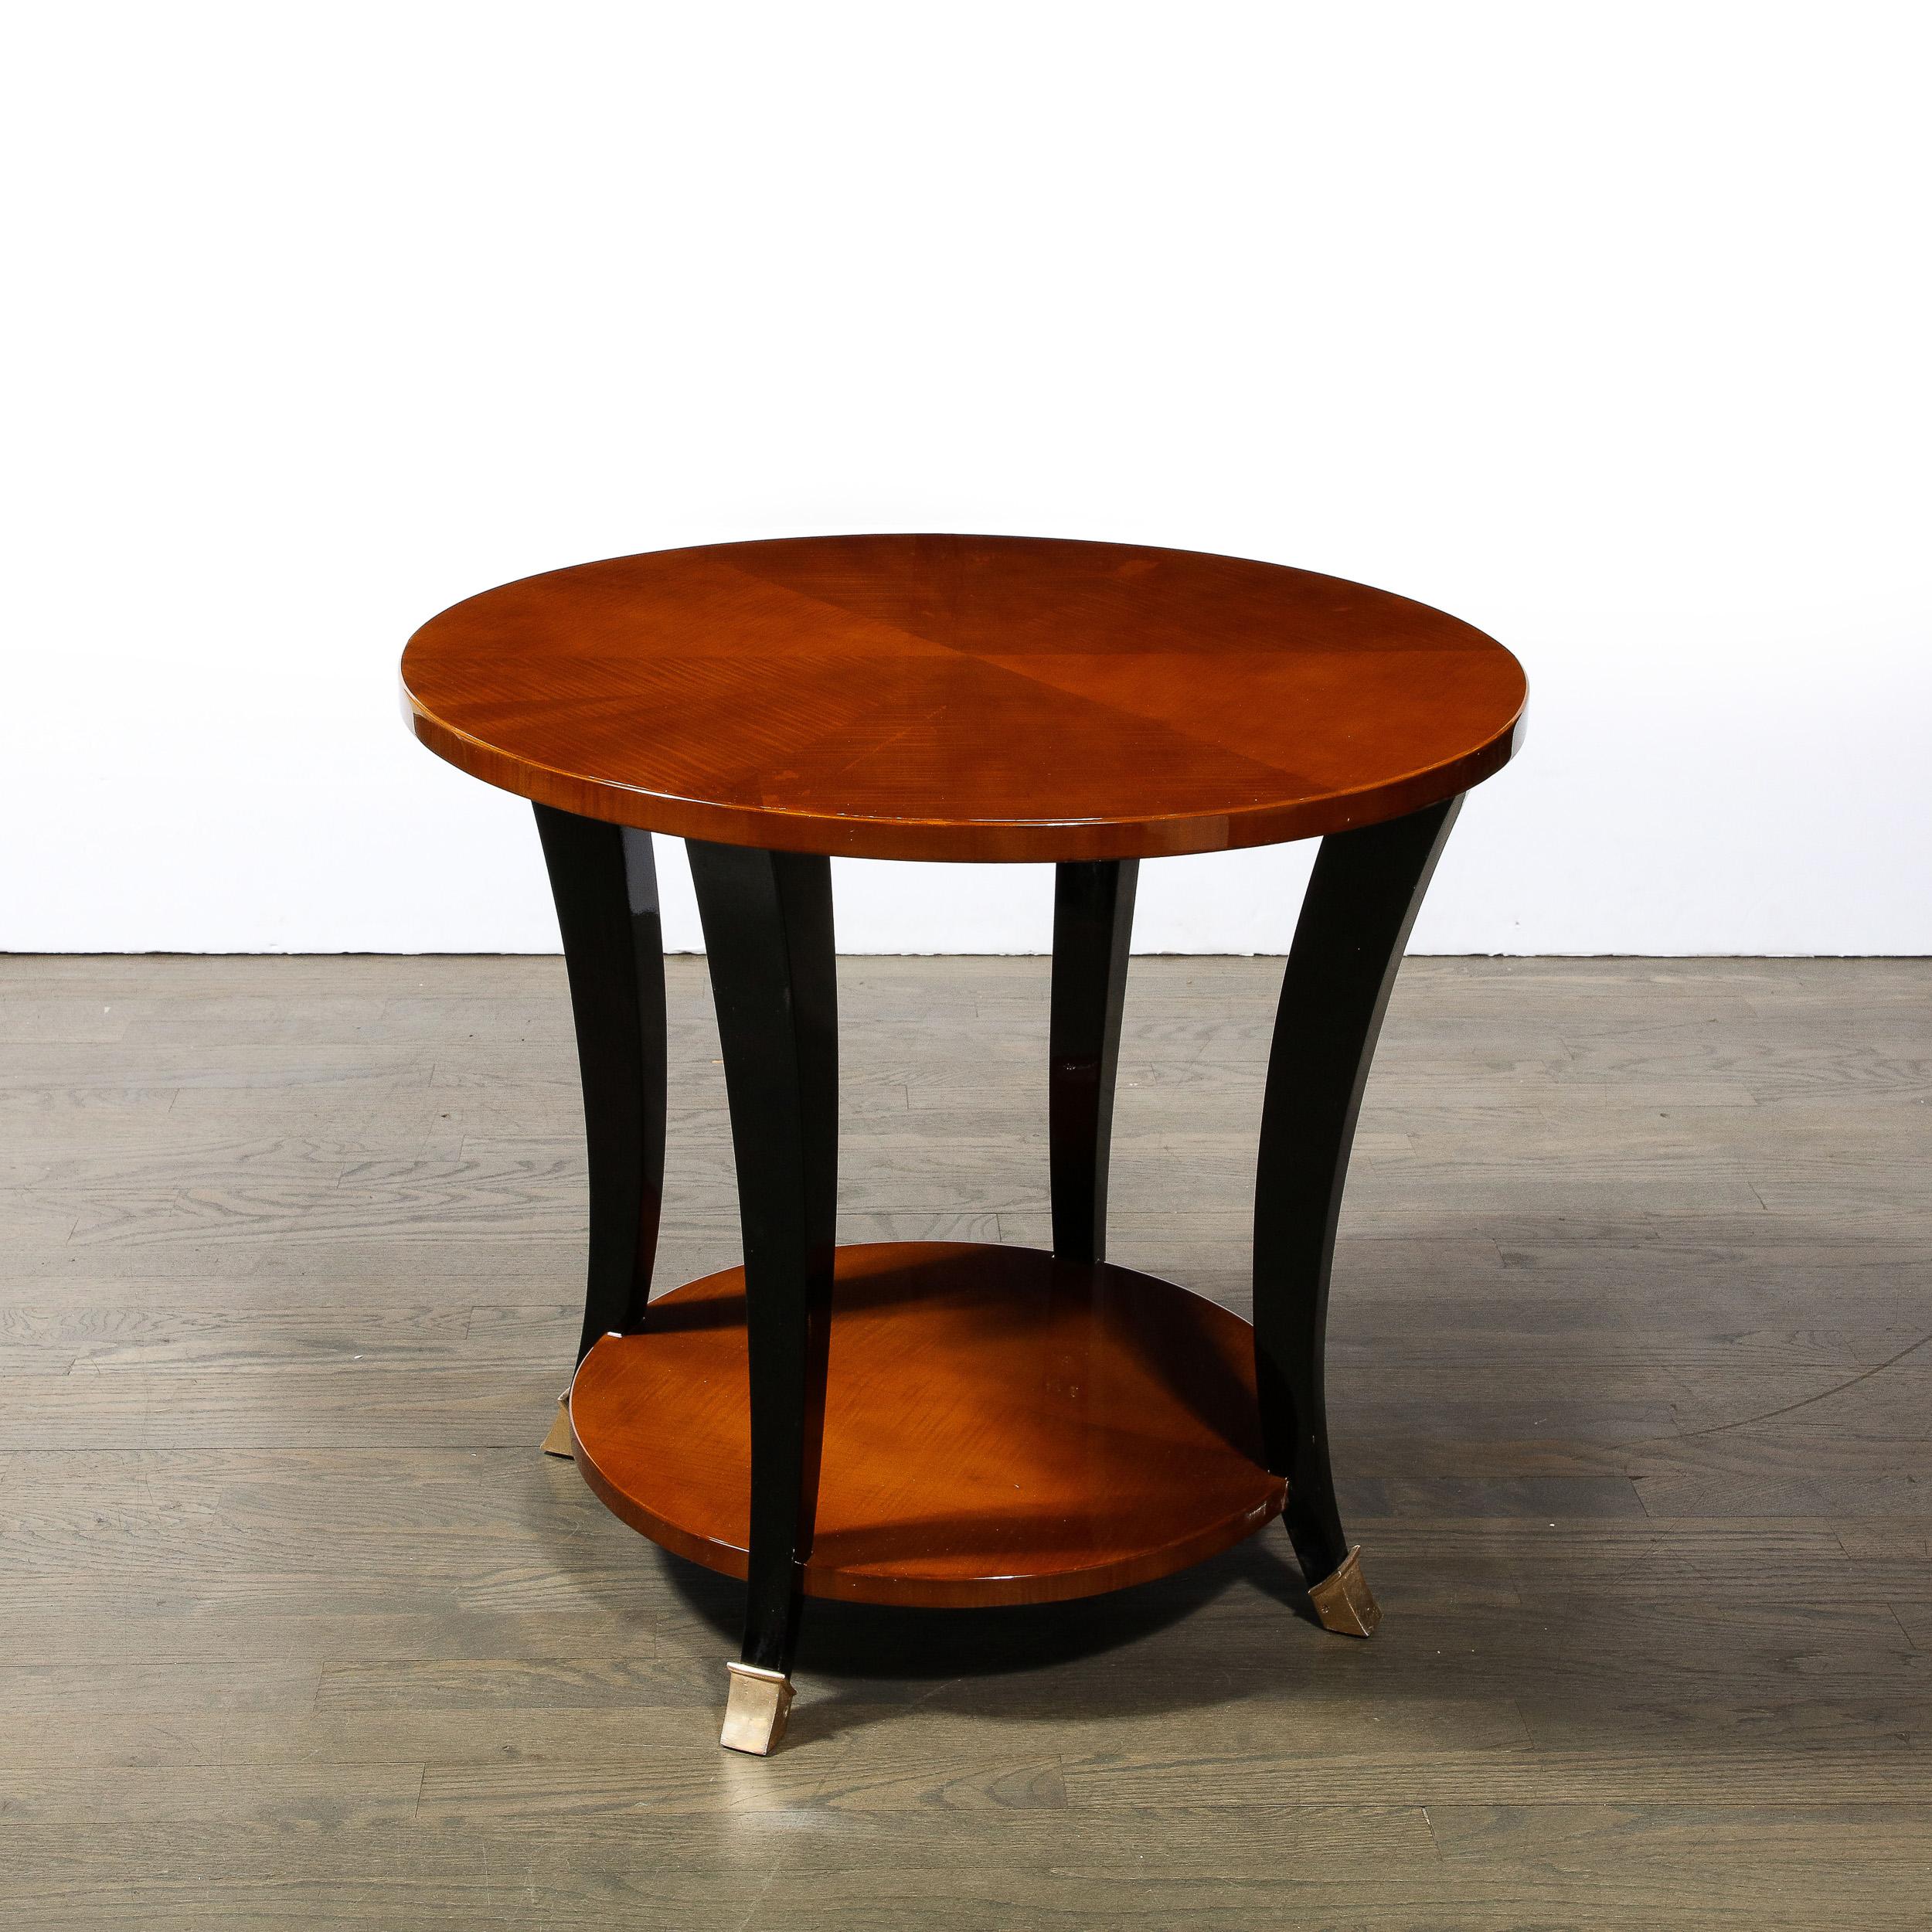 Mid-20th Century Art Deco Gueridon Table in Bookmatched Walnut W/ Ebonized Legs & Brass Sabots For Sale